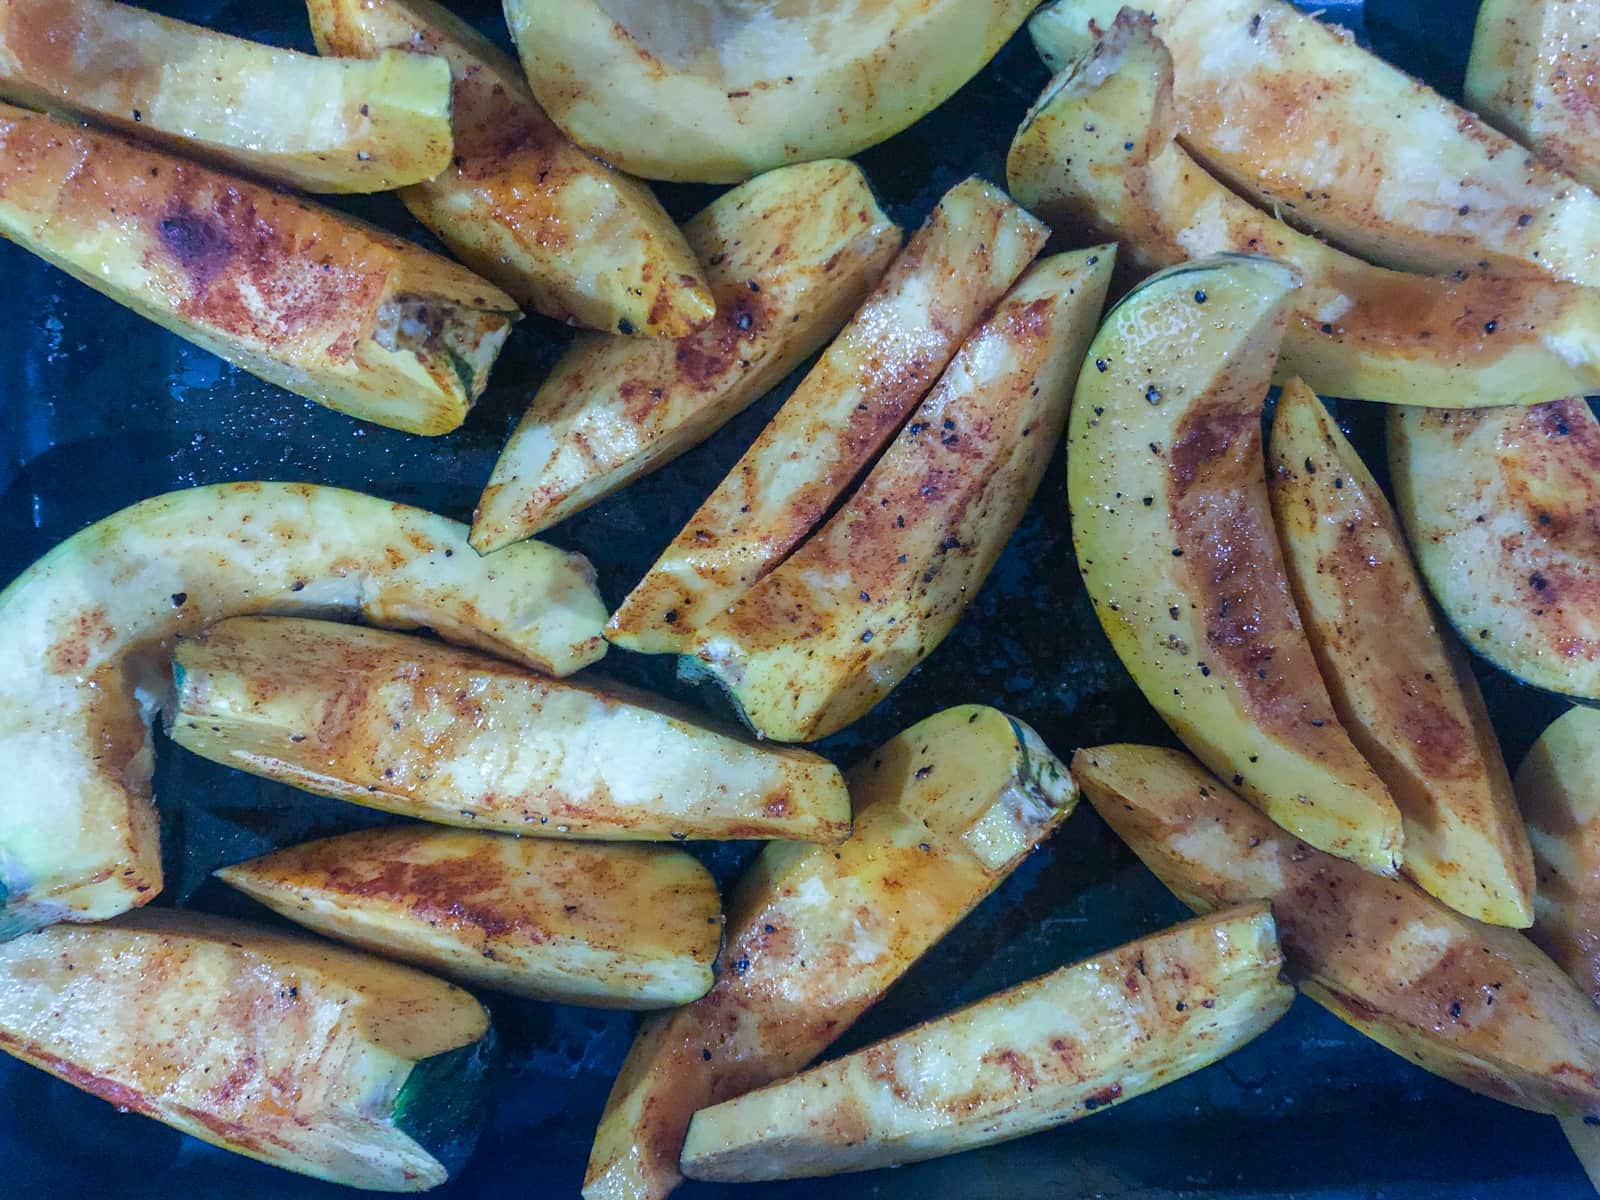 Wedges of pumpkins tossed with smoked paprika on a baking tray.